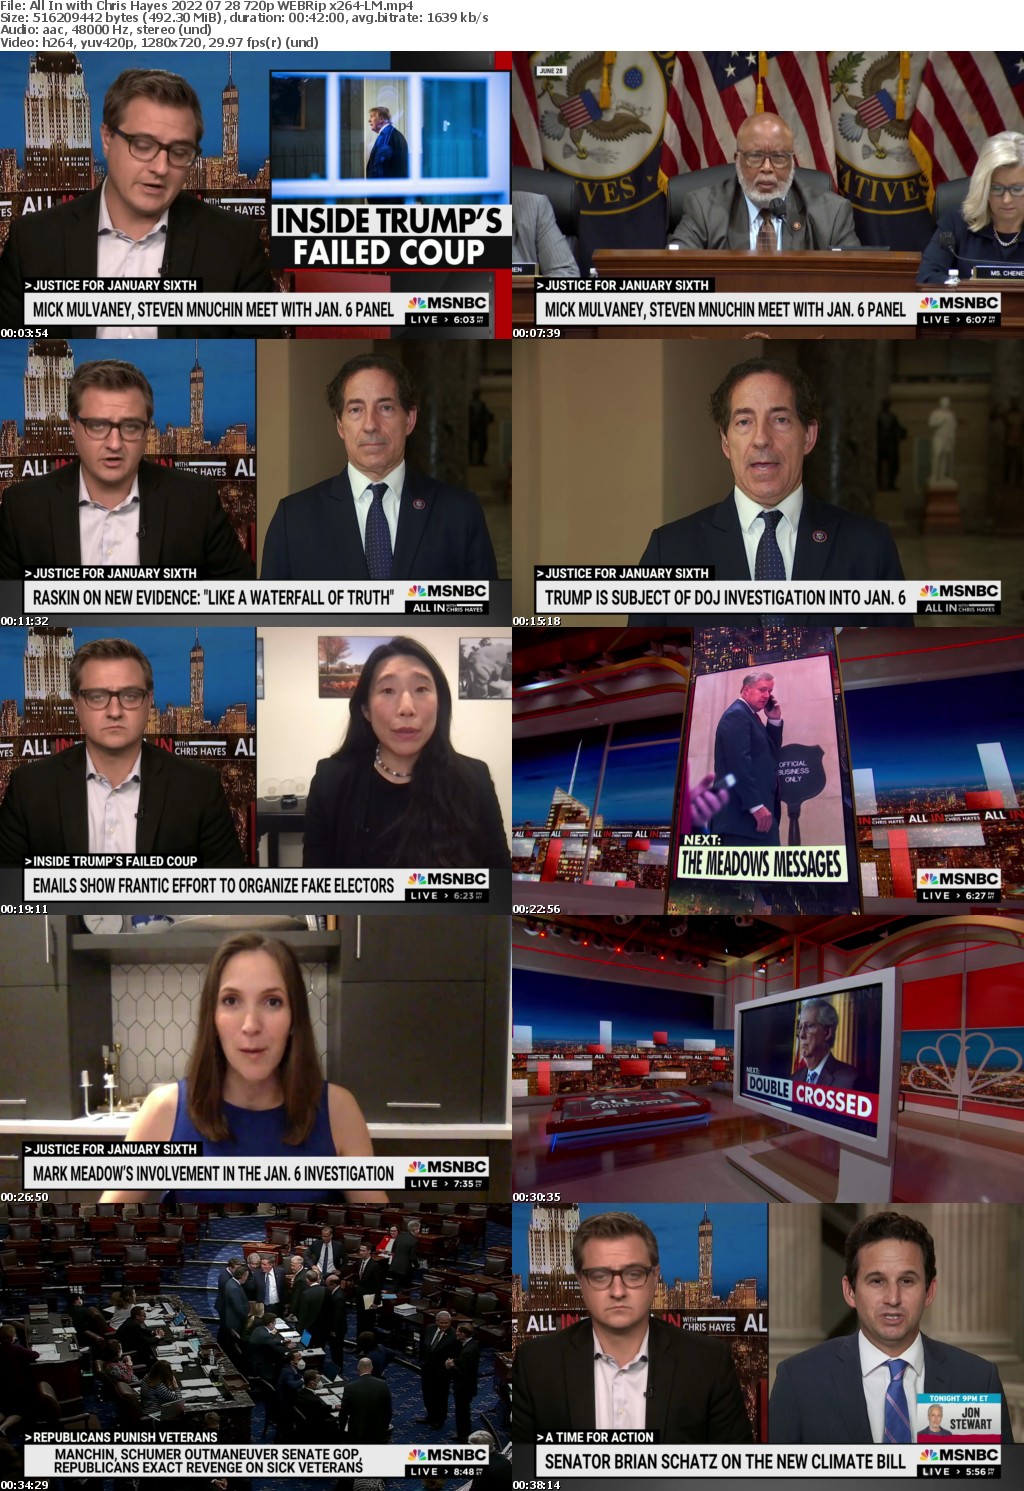 All In with Chris Hayes 2022 07 28 720p WEBRip x264-LM